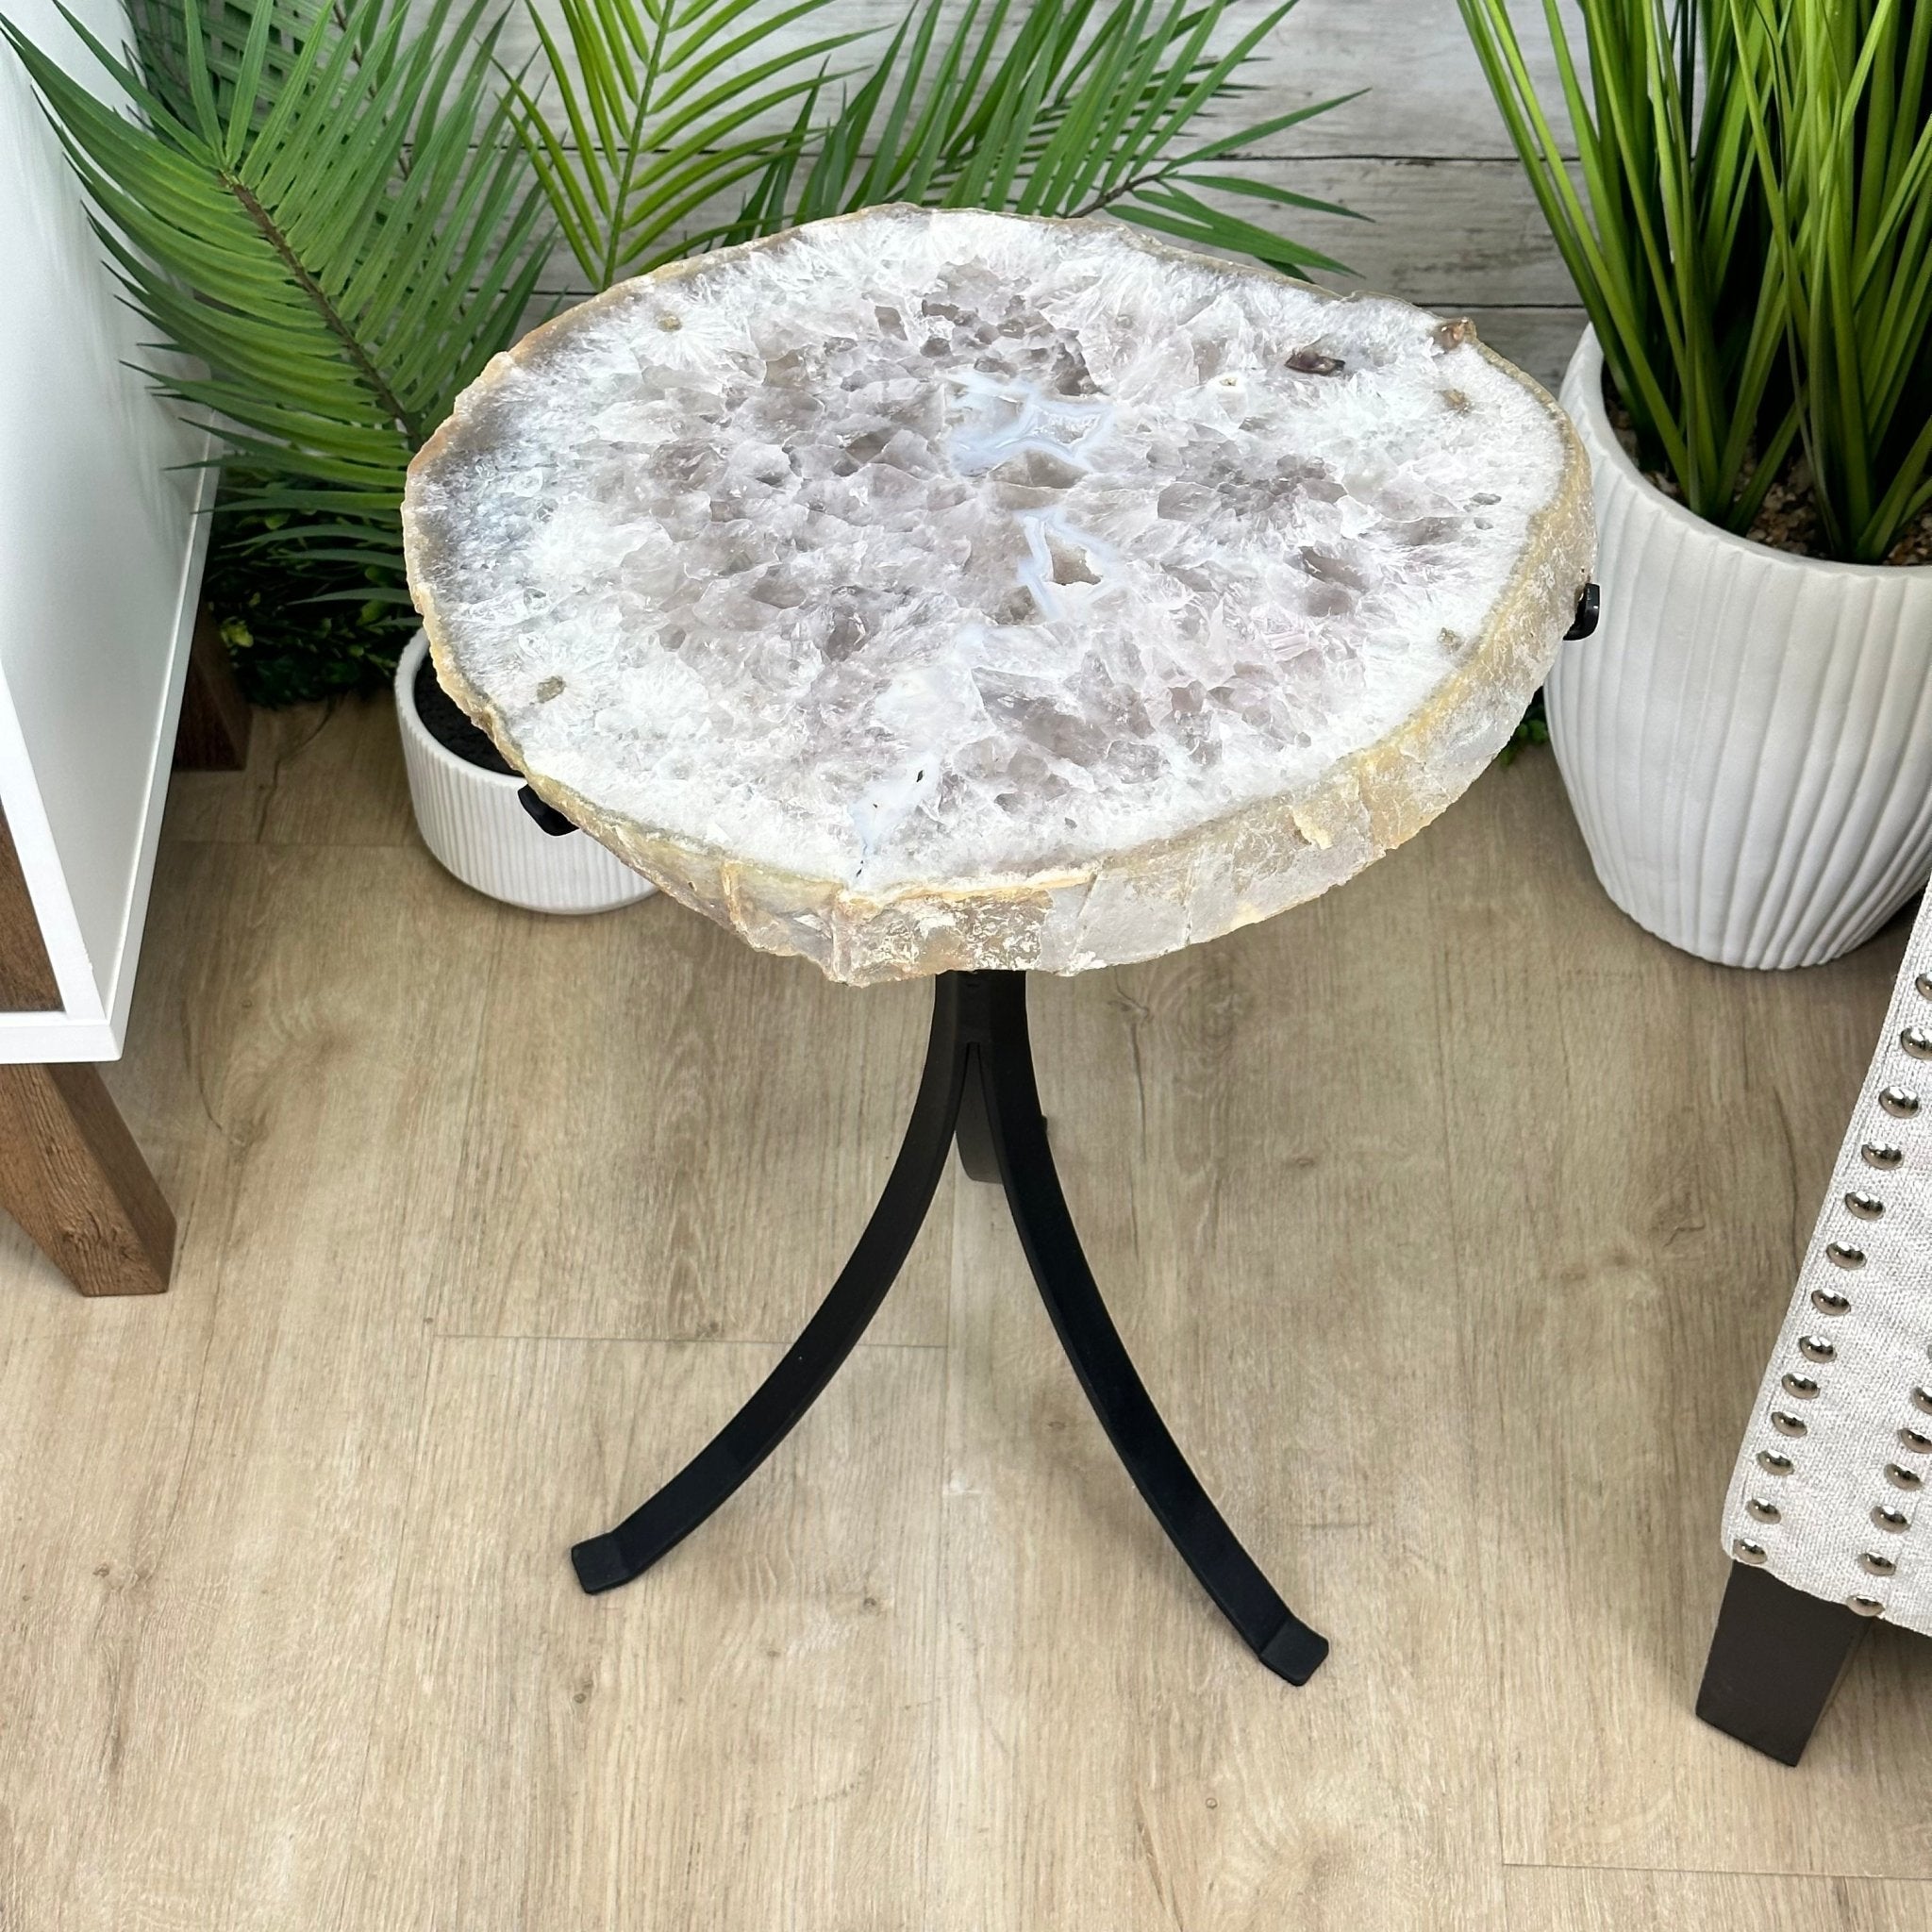 Natural Brazilian Agate Side Table on a black metal base, 22" tall #1305-0172 by Brazil Gems - Brazil GemsBrazil GemsNatural Brazilian Agate Side Table on a black metal base, 22" tall #1305-0172 by Brazil GemsTables: Side1305-0172